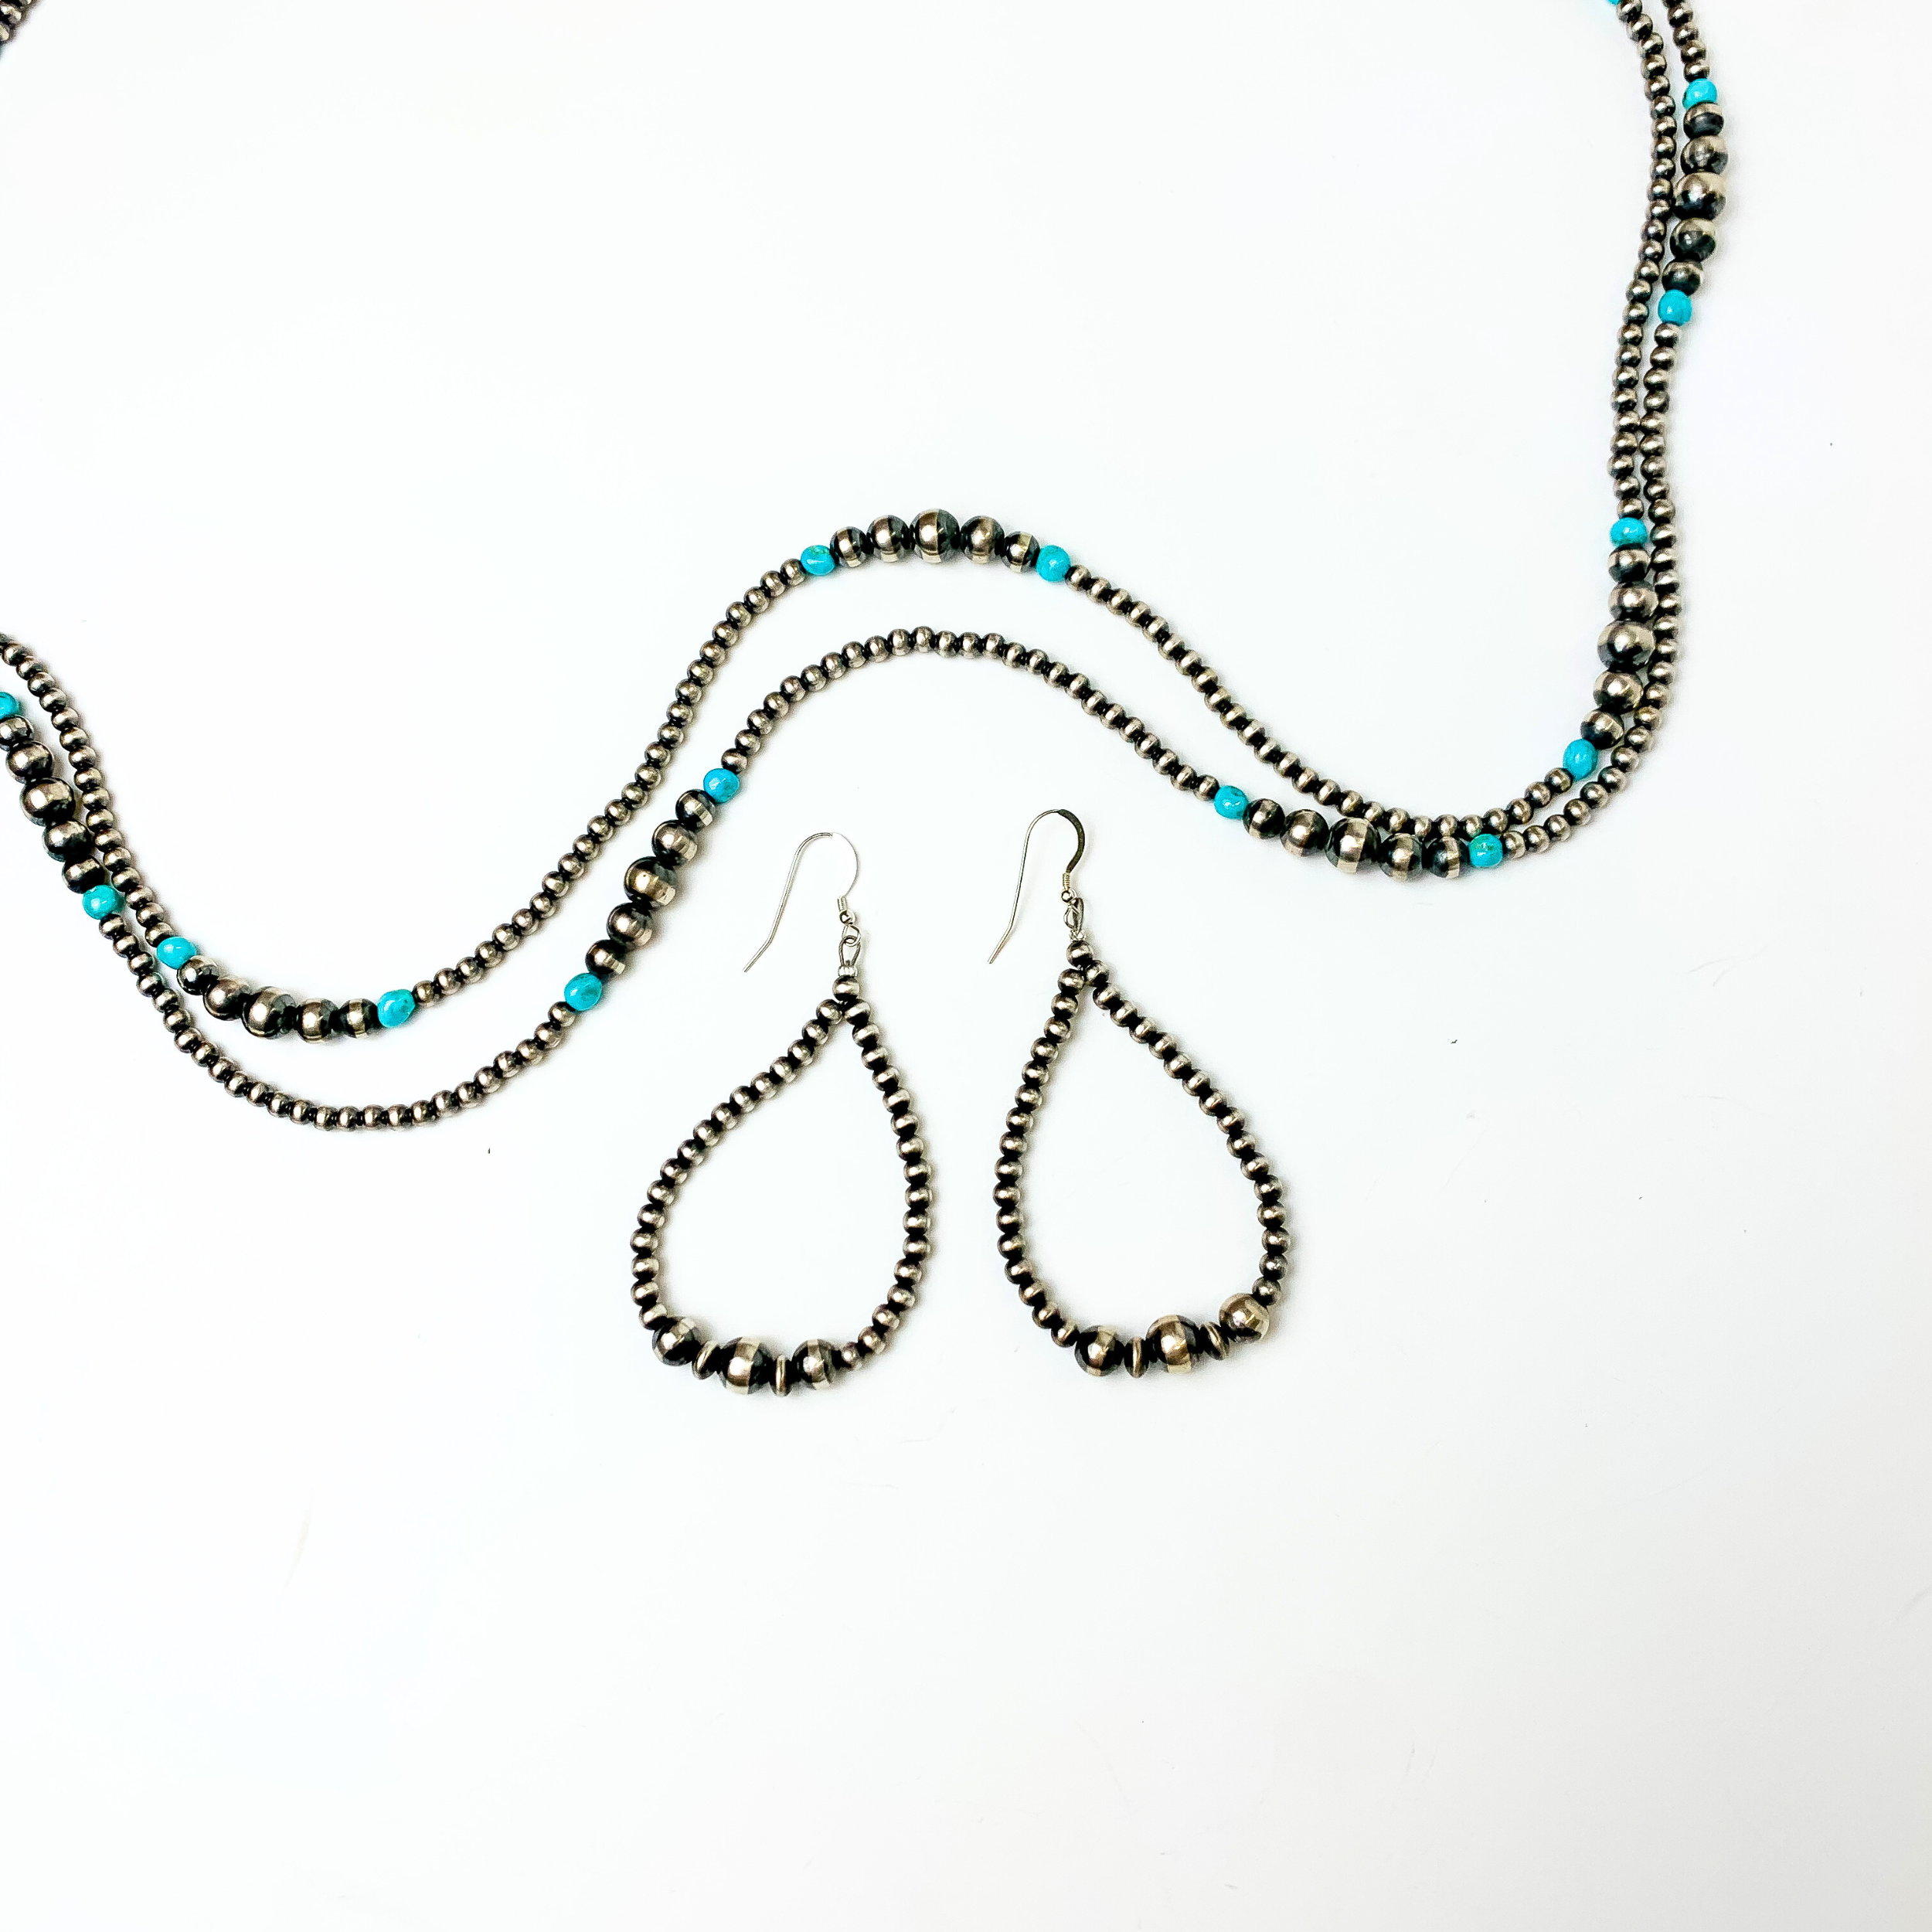 Centered in the picture is a pair of navajo pearl teardrop earrings on a white background. 